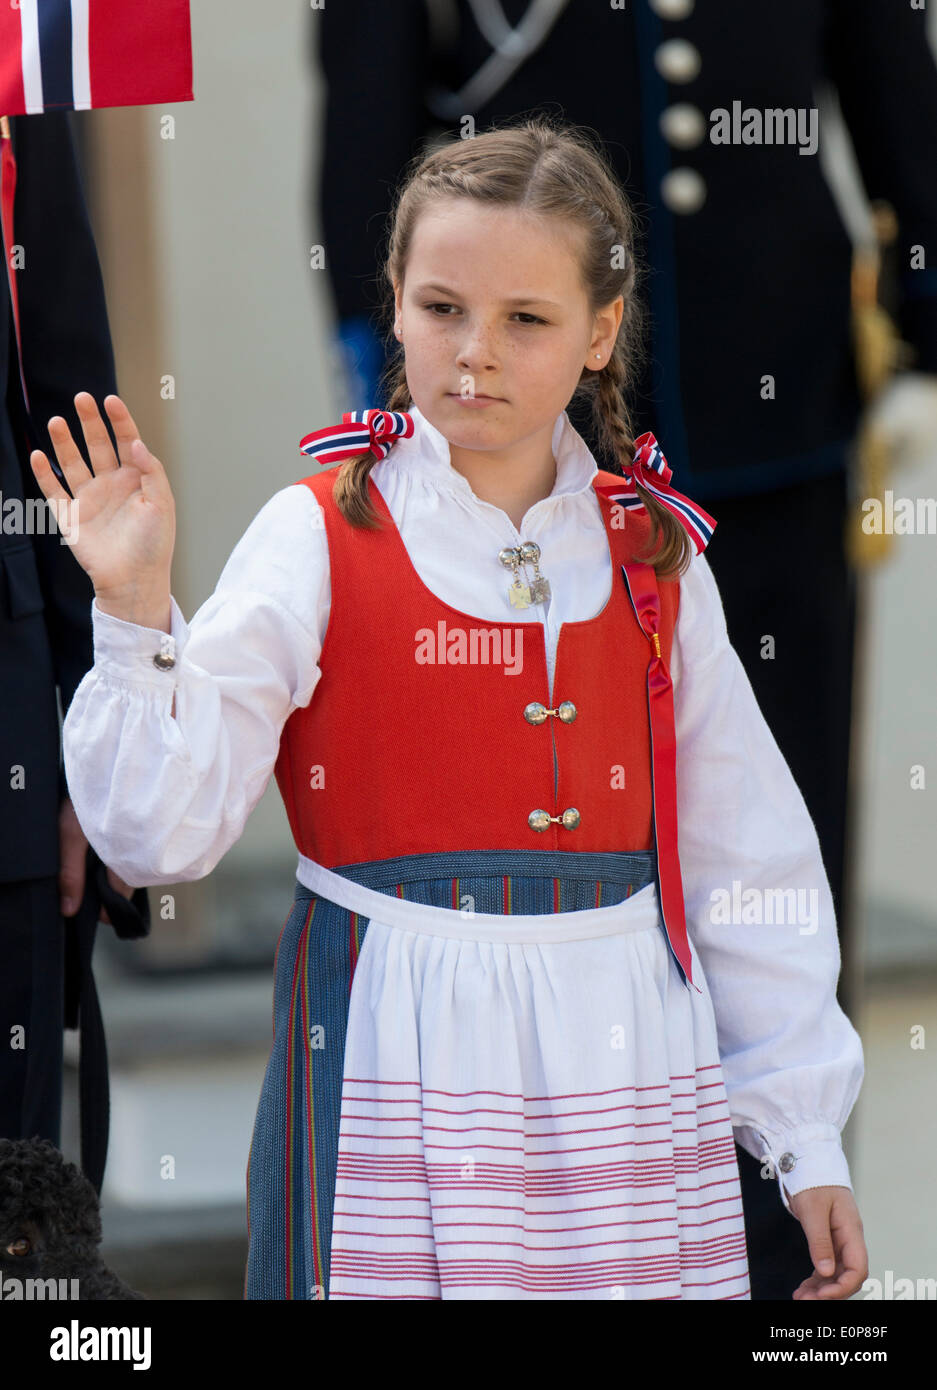 Oslo, Norway. 17th May, 2014. Princess Ingrid-Alexandra of Norway celebrates the national day at the residence in Skaugum and at the balcony of the royal palace in Oslo.  Credit:  Albert Nieboer /dpa /Alamy Live News Stock Photo